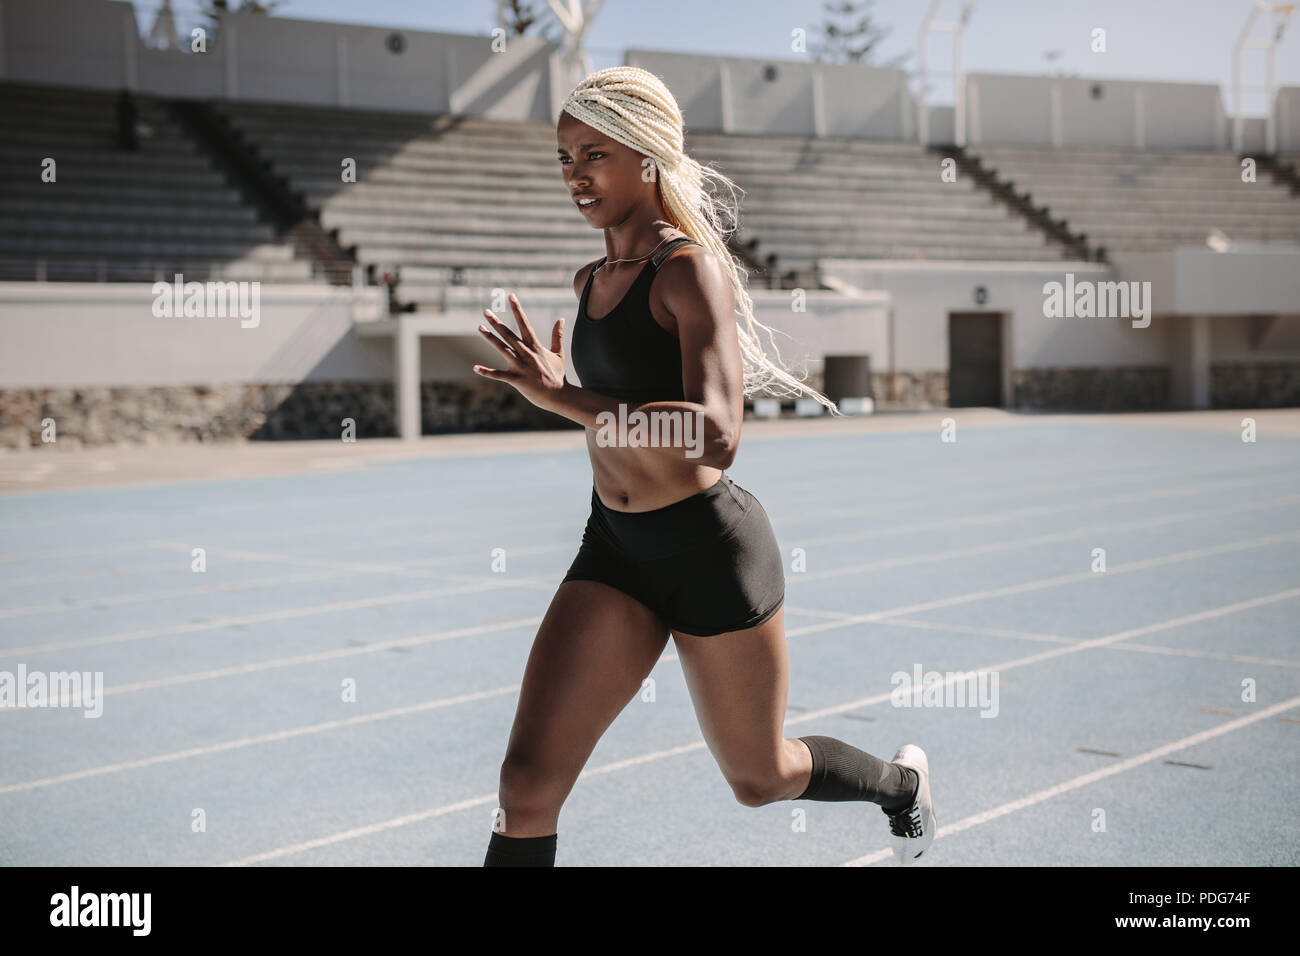 Side view of a female athlete sprinting on a running track in a track and field stadium. Female runner training on a running track. Stock Photo